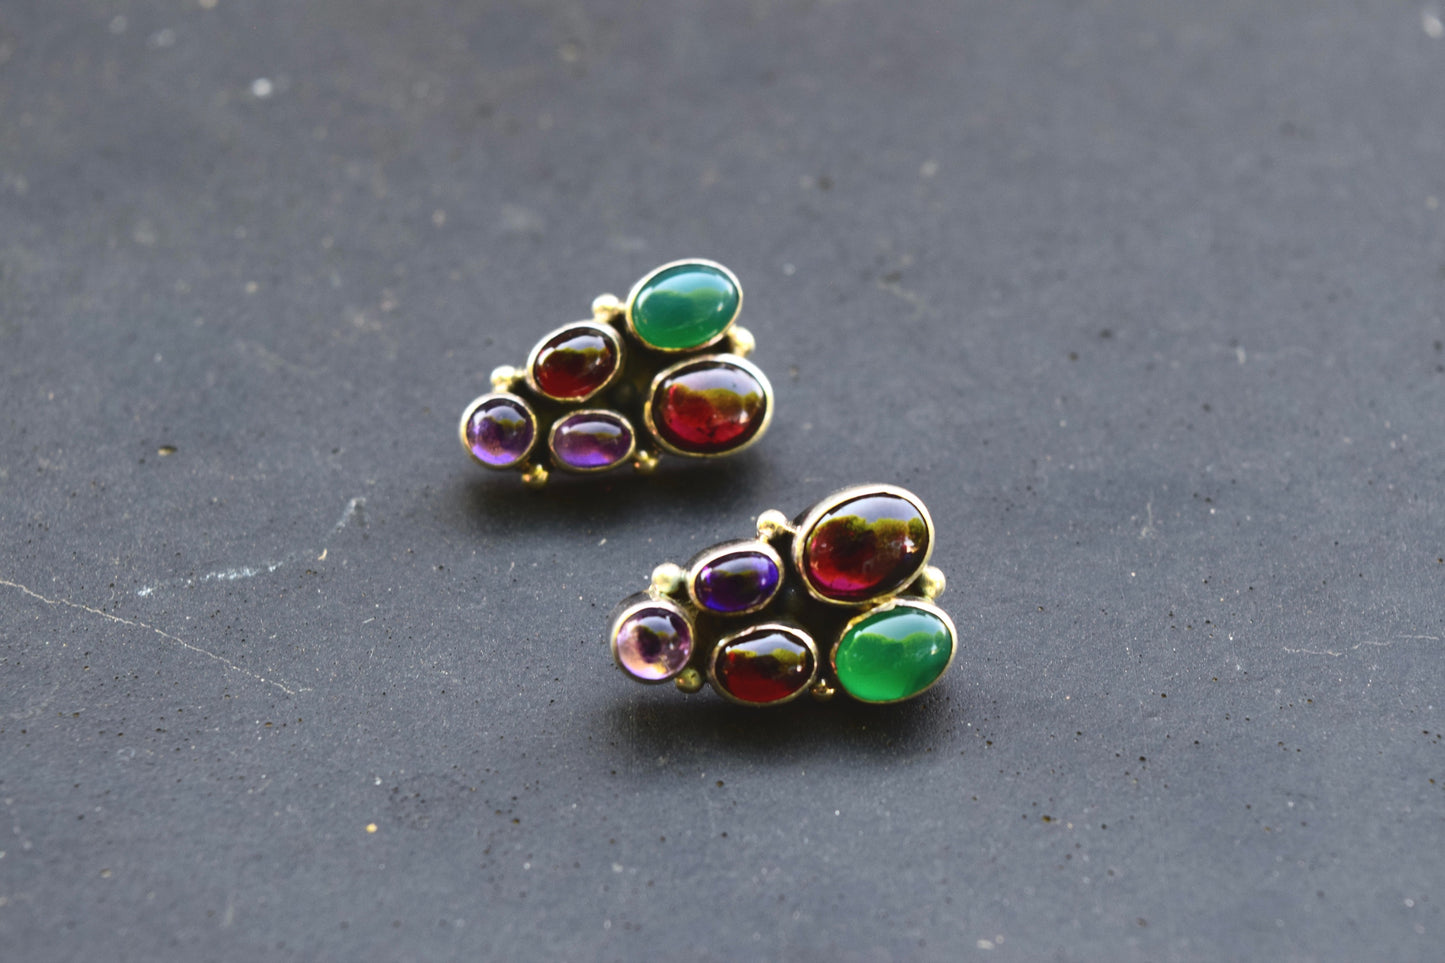 VINTAGE GEM CLUSTER STUD EARRINGS FROM THE RODGERS COLLECTION